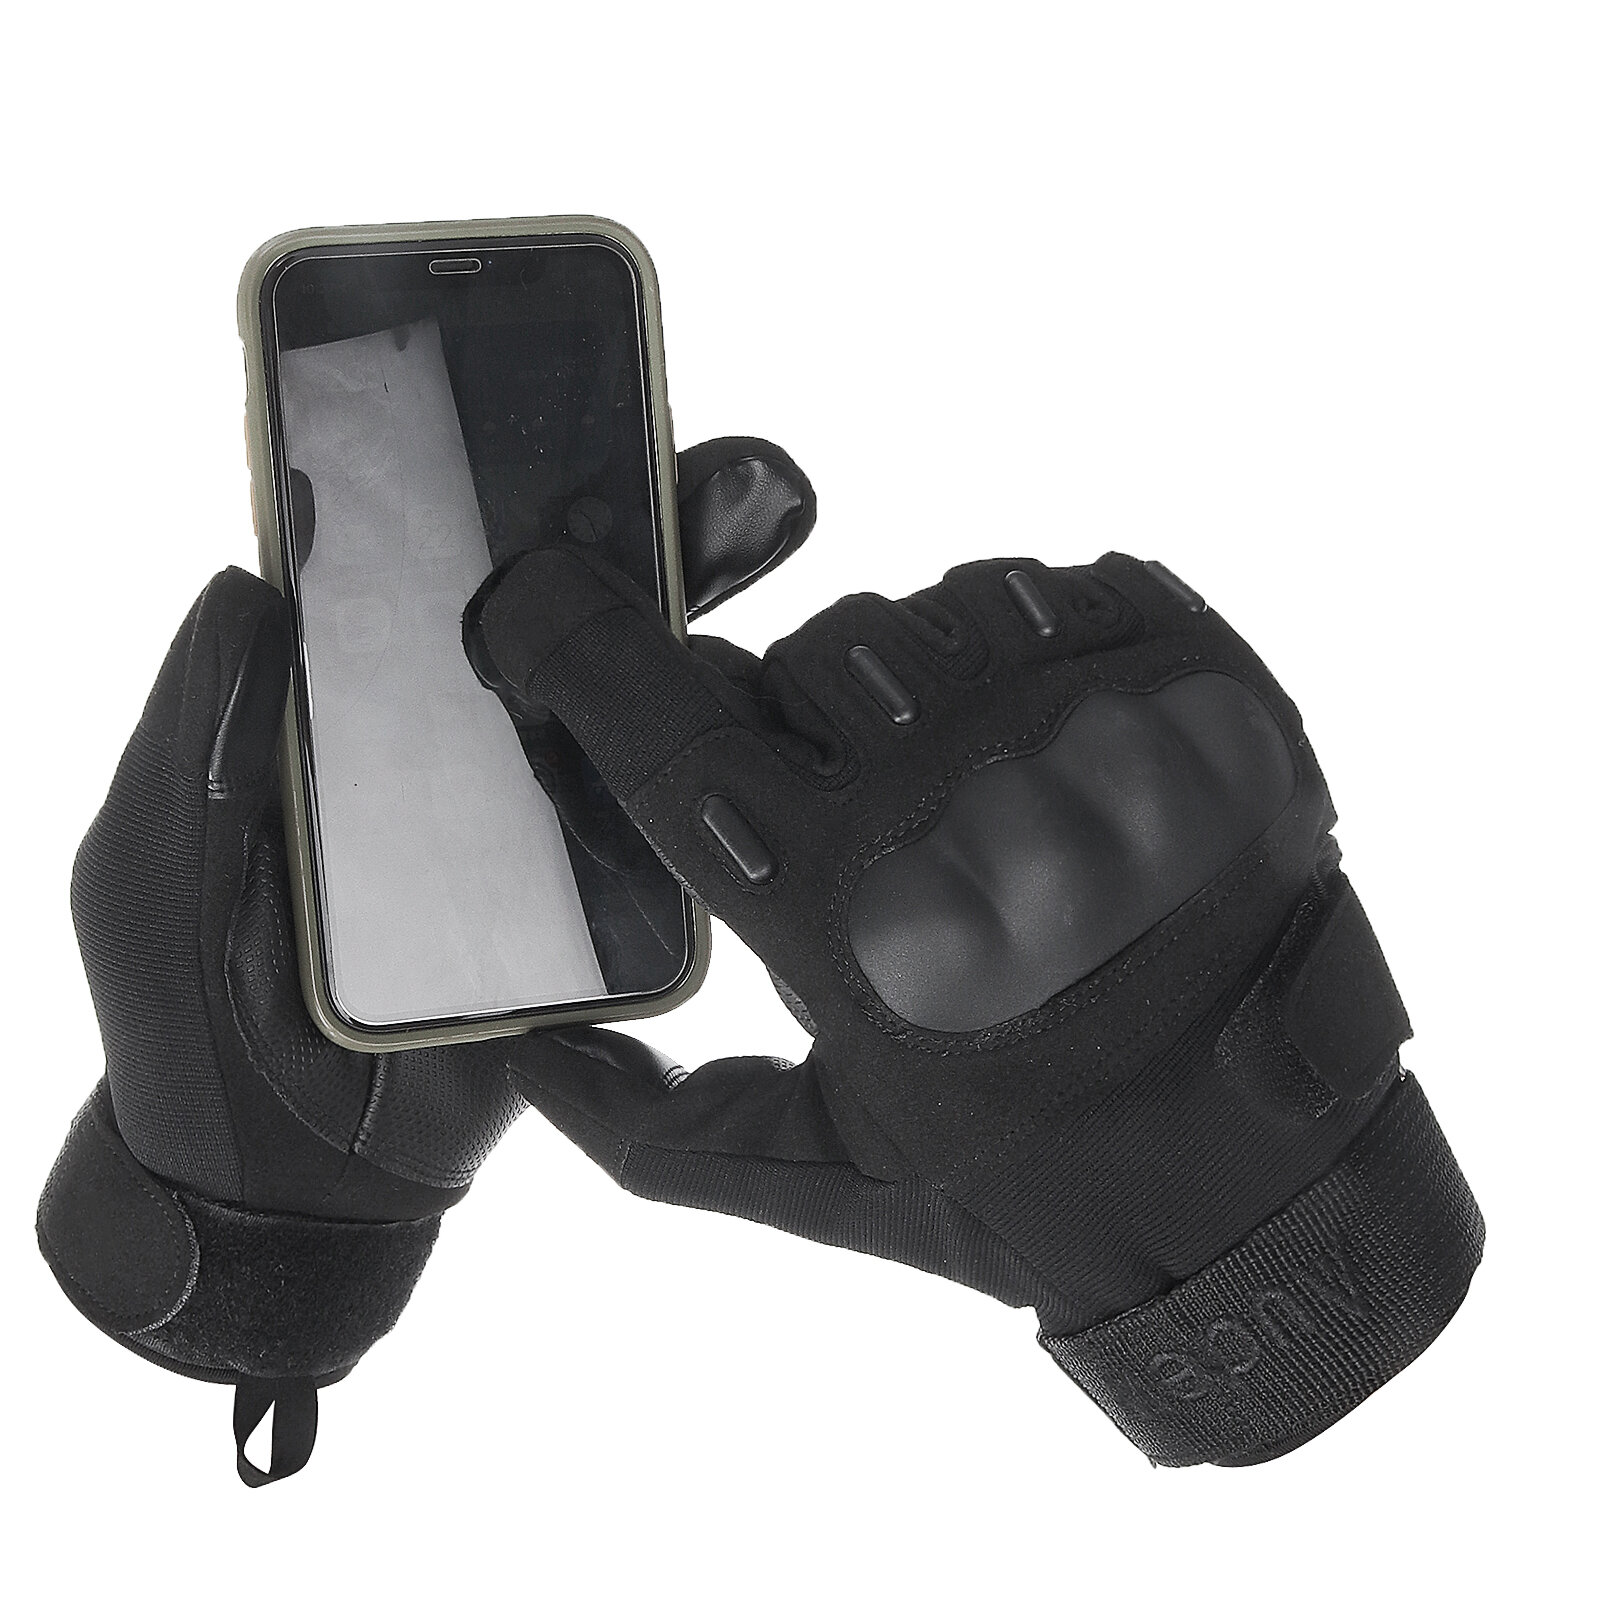 Audew Winter Warm Waterproof Windproof Non-Slip Three-Finger Touch Screen Outdoors Motorcycle Riding...